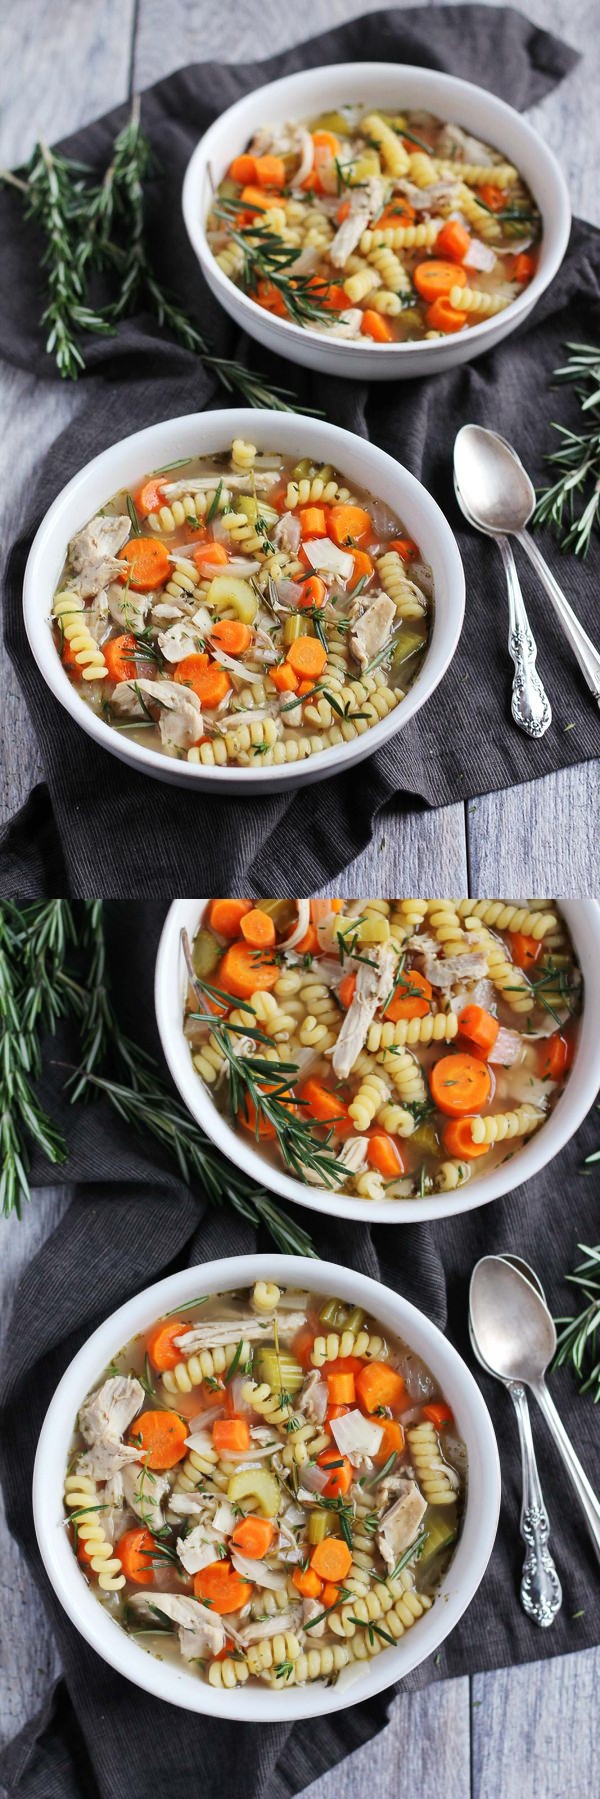 Comforting & Healthy Slow Cooker Chicken Noodle Soup (with a hint of lemon & rosemary